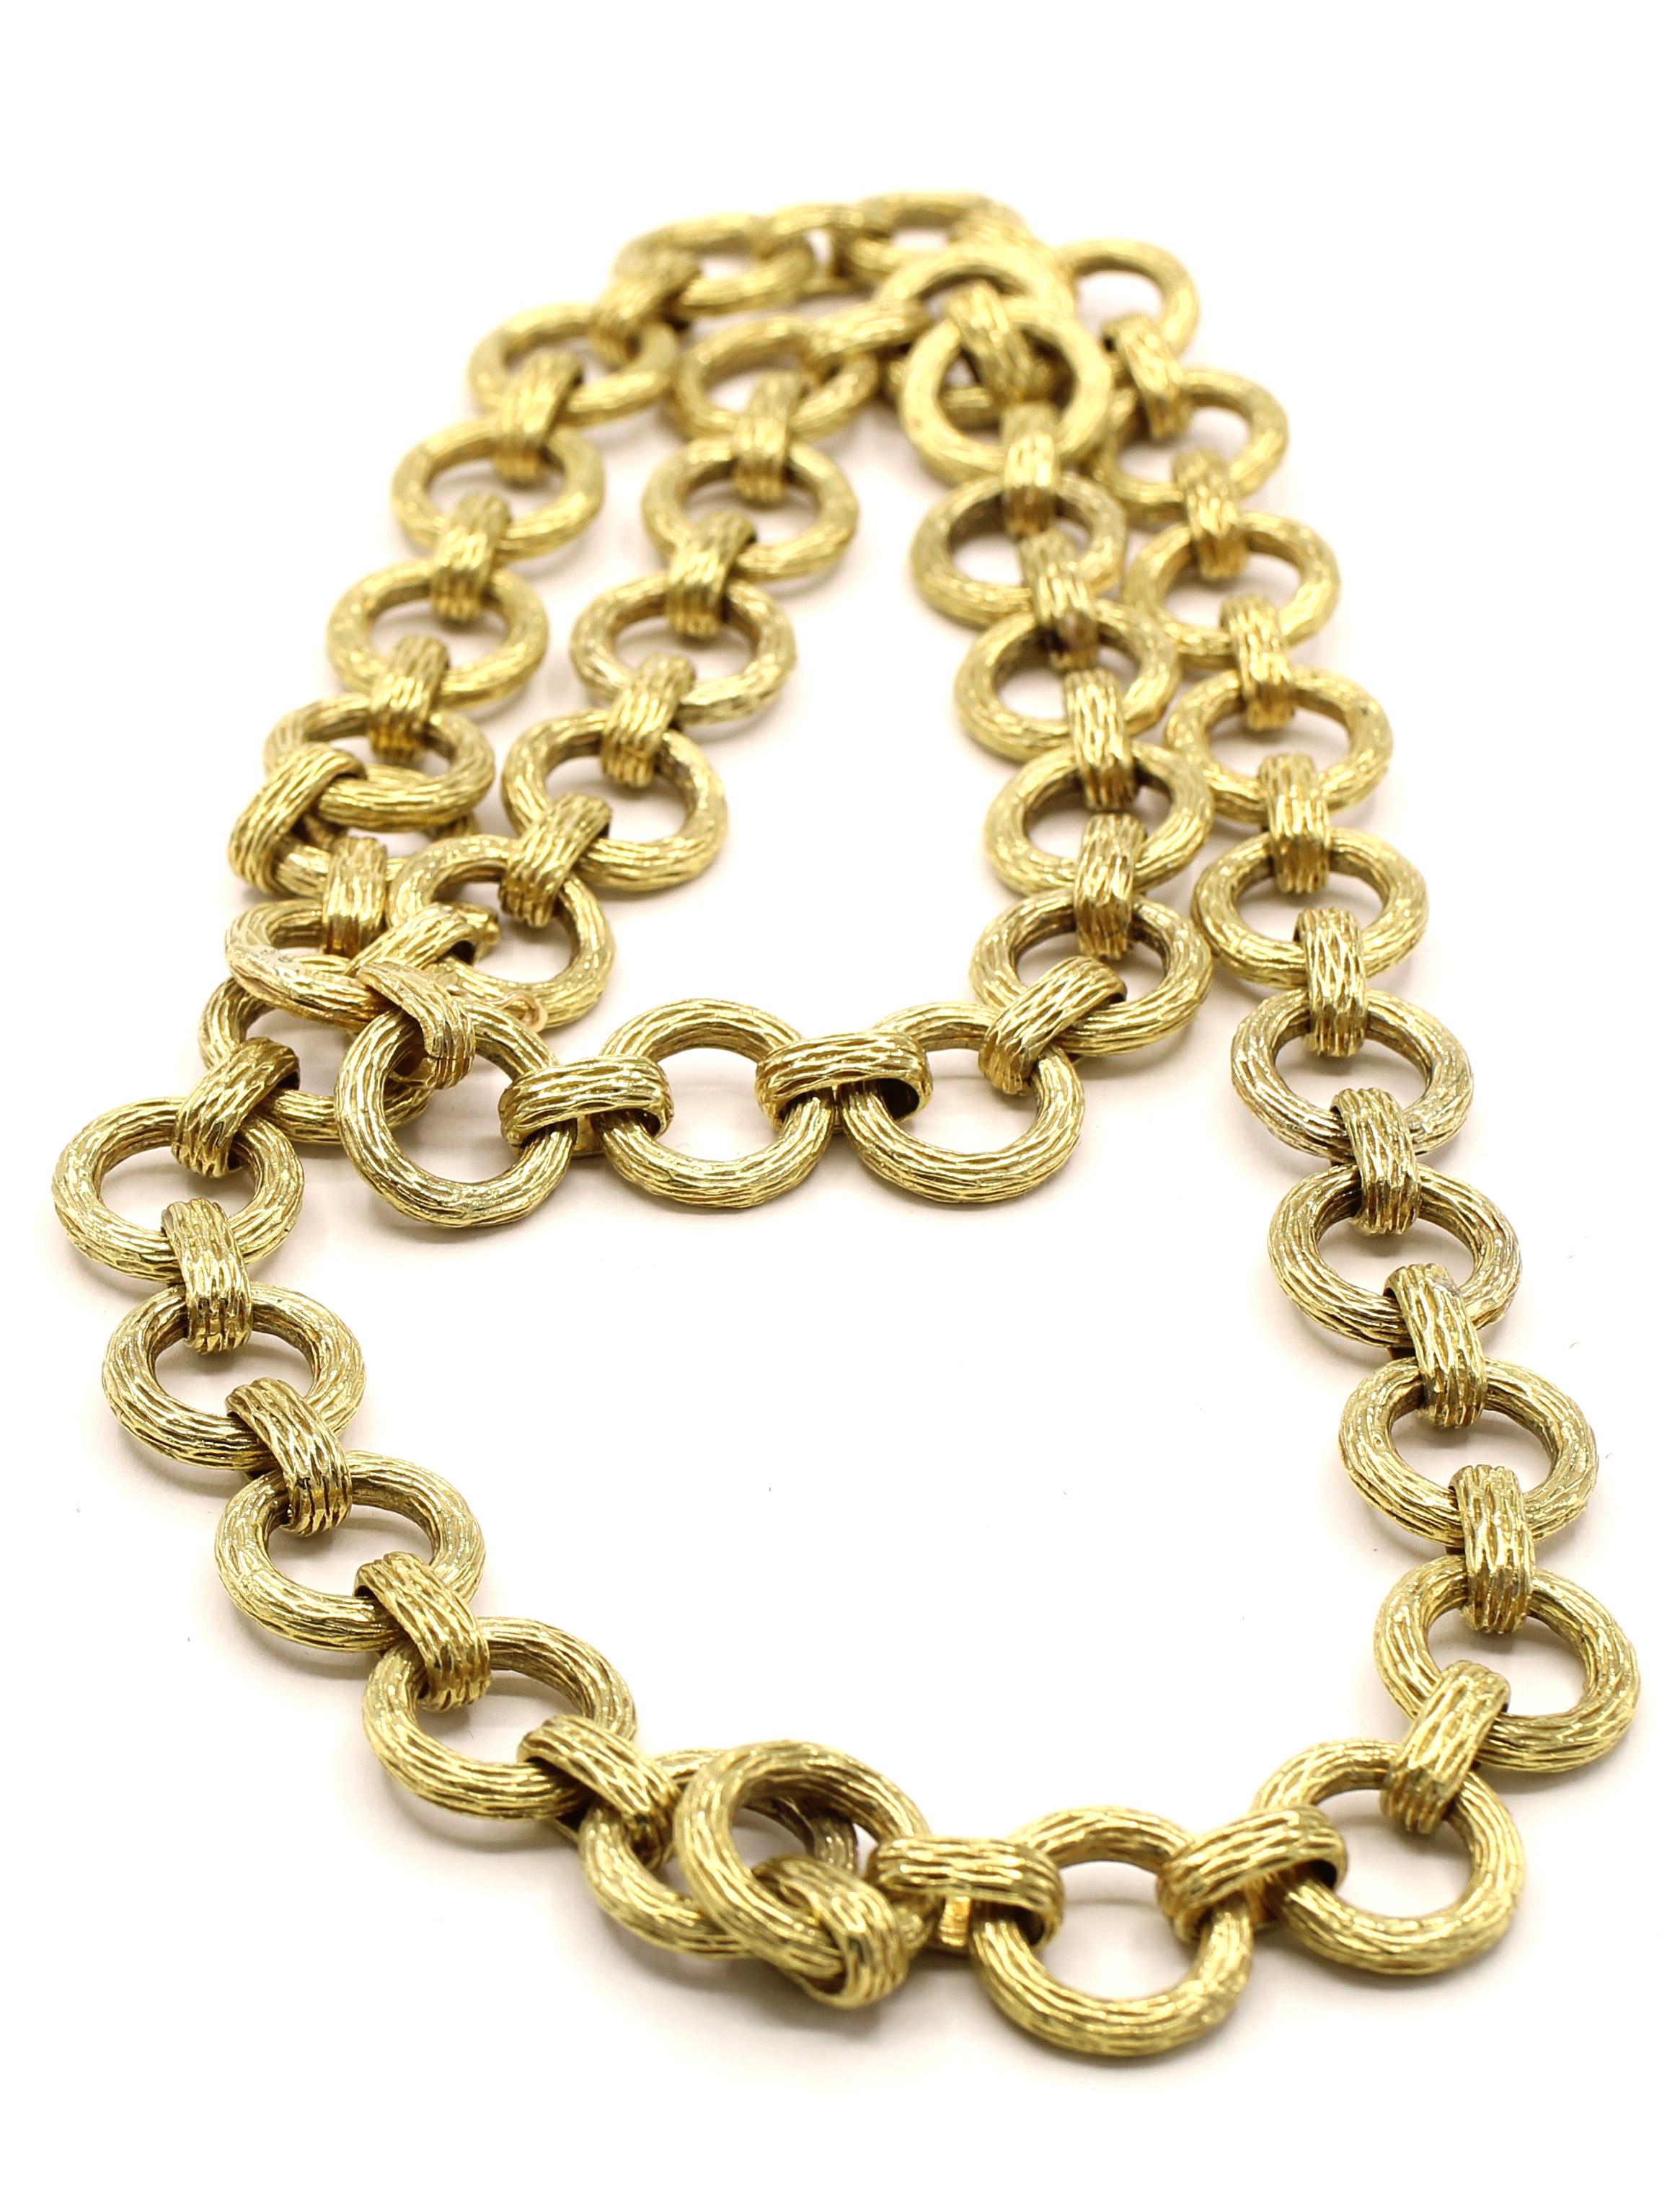 Beautifully handcrafted in 18 karat yellow gold this 1980s chic chain necklace consists of 39 textured solid gold elements, flexibly connected to textured oval links. The necklace measures 26.5 inches in length. The perfect wear for any occasion and